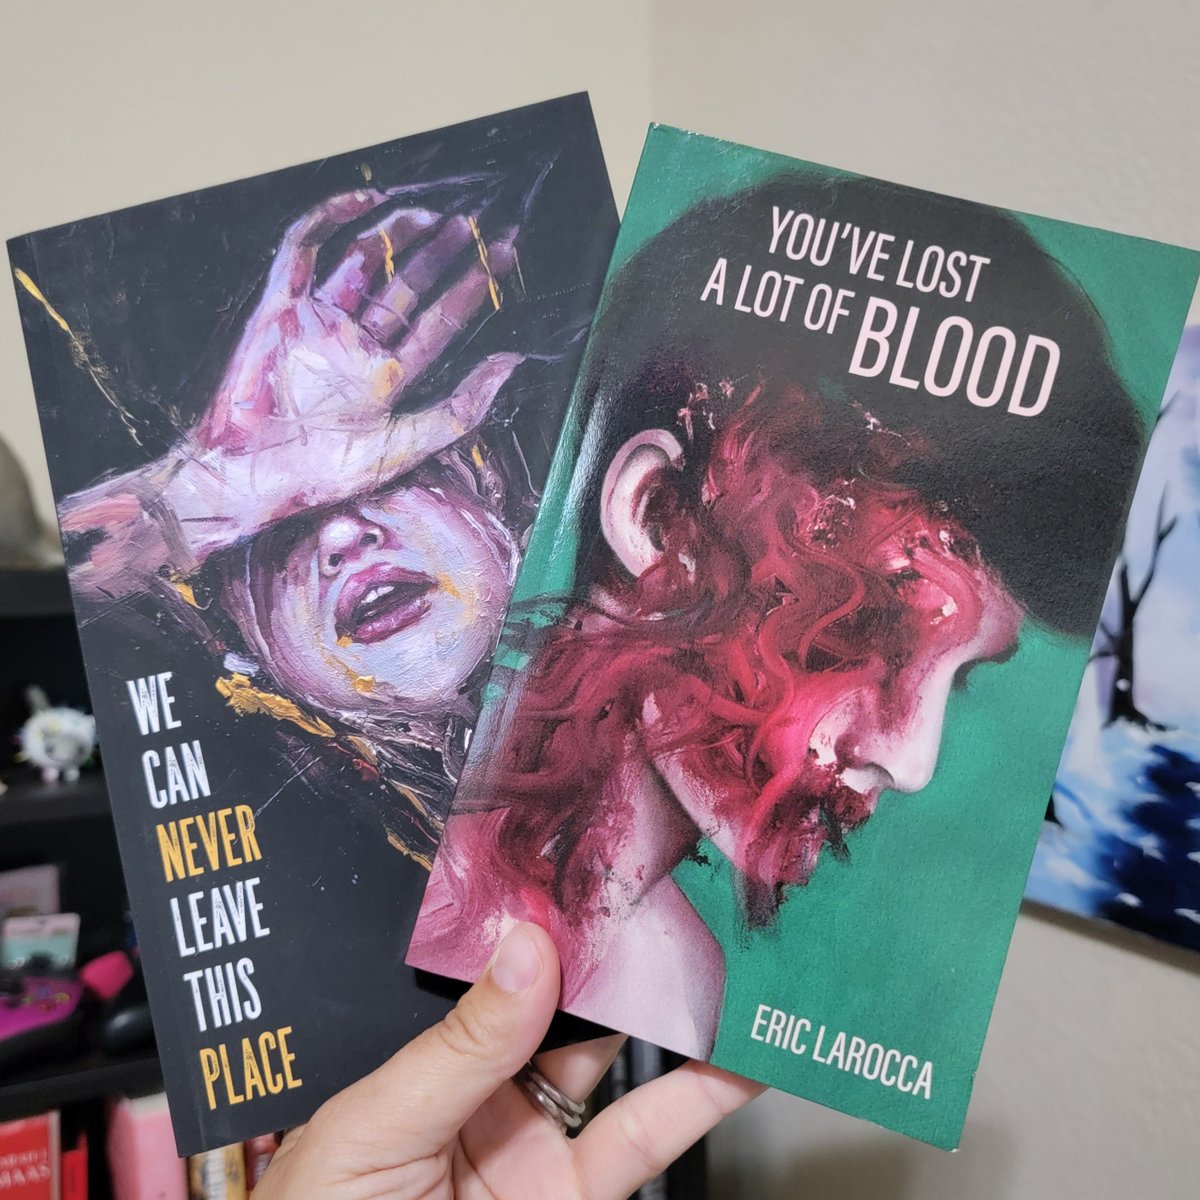 we also got ourselves #YouveLostALotOfBlood & #WeCanNeverLeaveThisPlace by @hystericteeth in today's #BookMail!

CAN WE TALK ABOUT THIS COVER ART JFC I adore it. done by the ridiculously talented, @KimJakobsson 👏🏻👏🏻